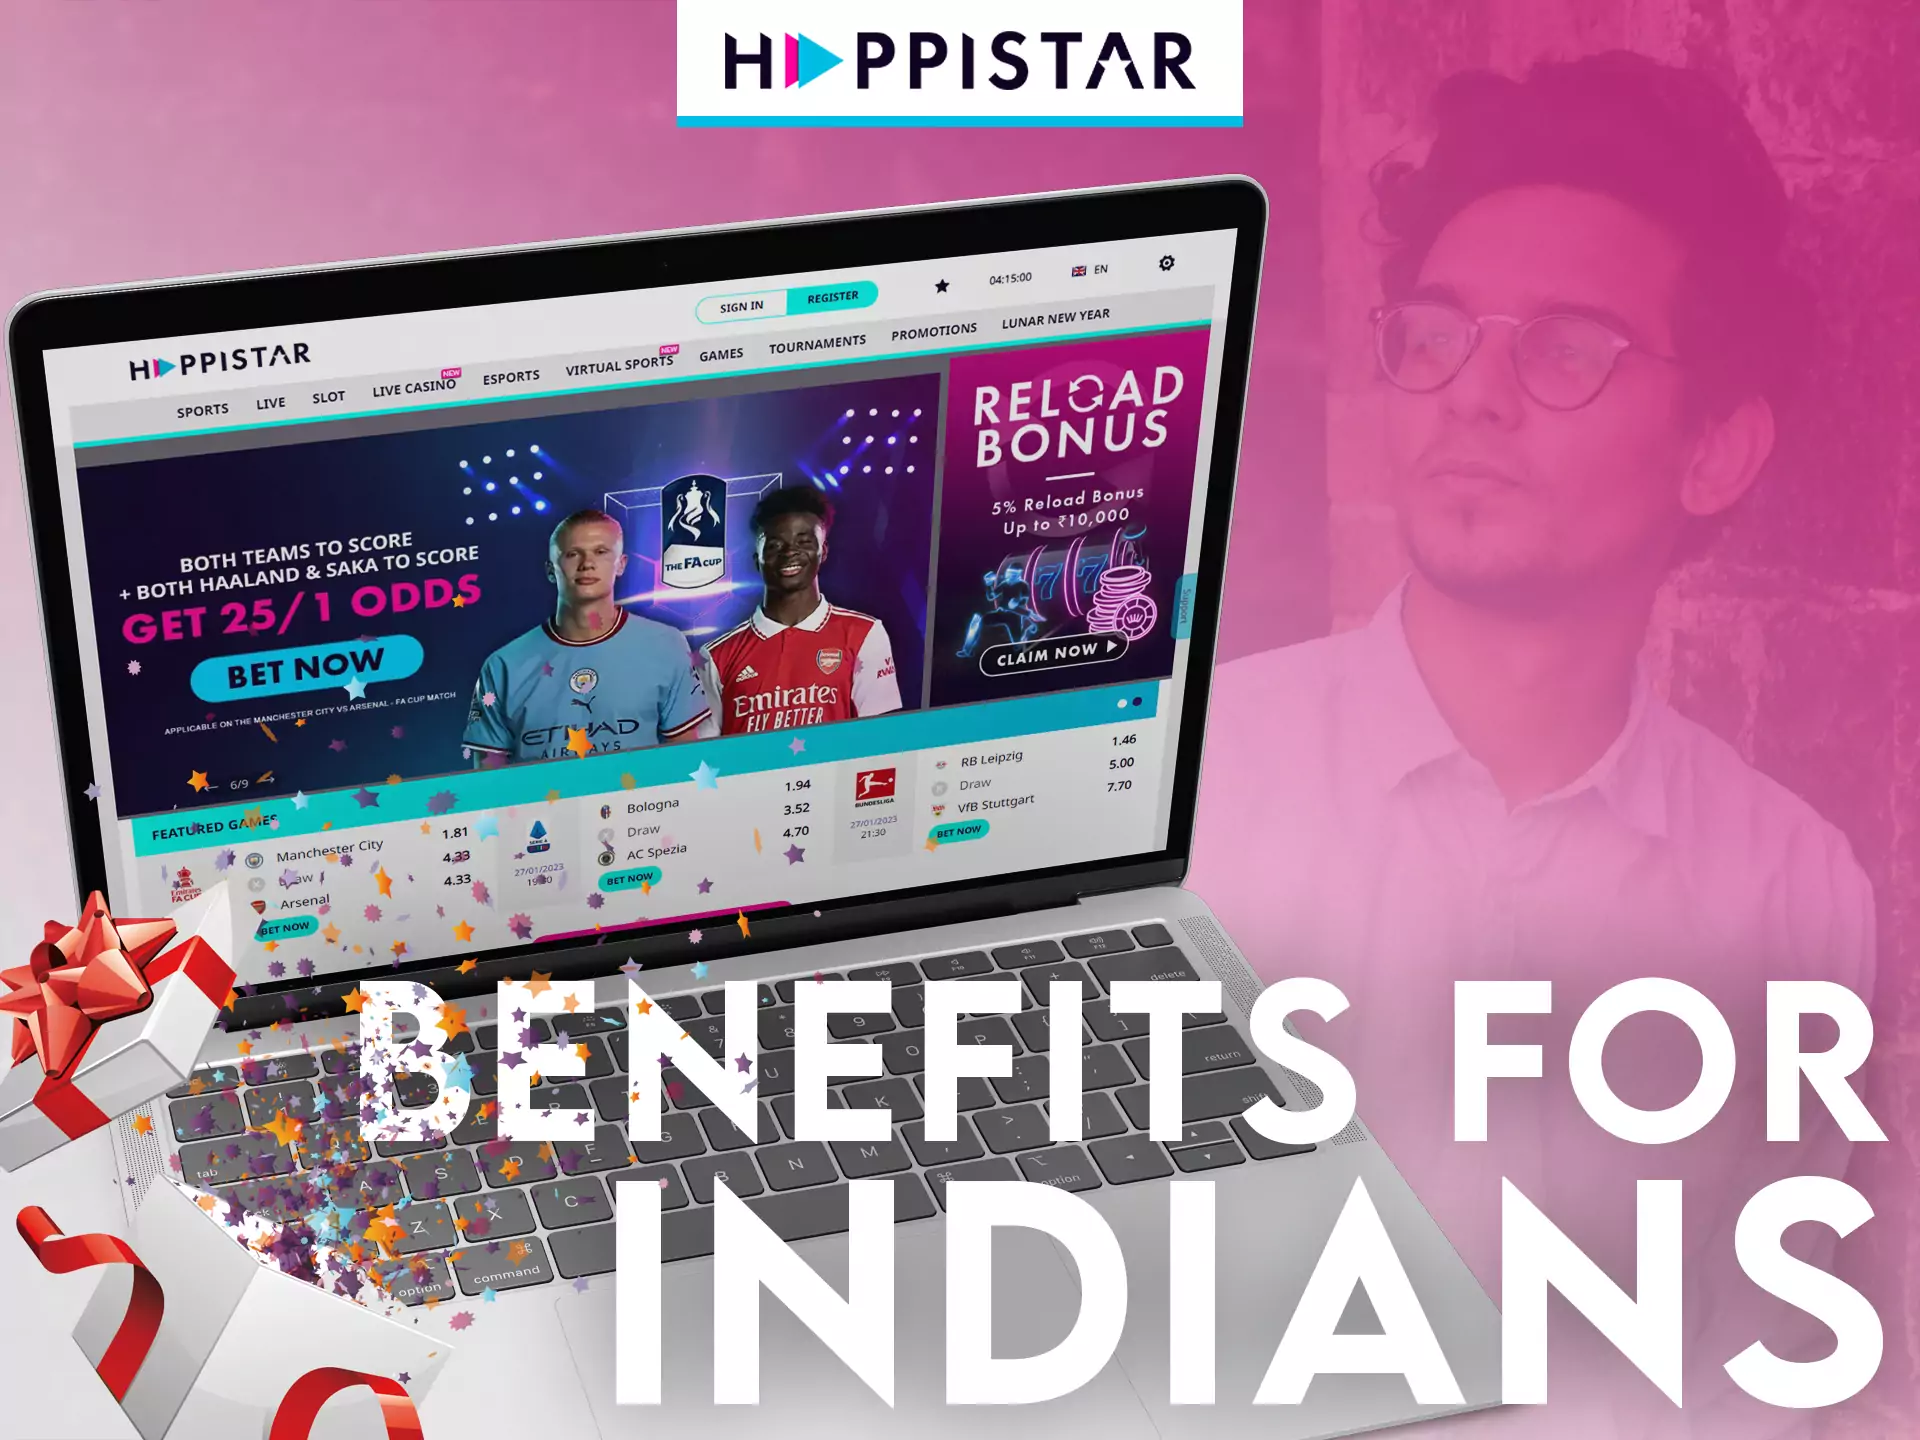 Happistar provides special conditions for bettors from India.